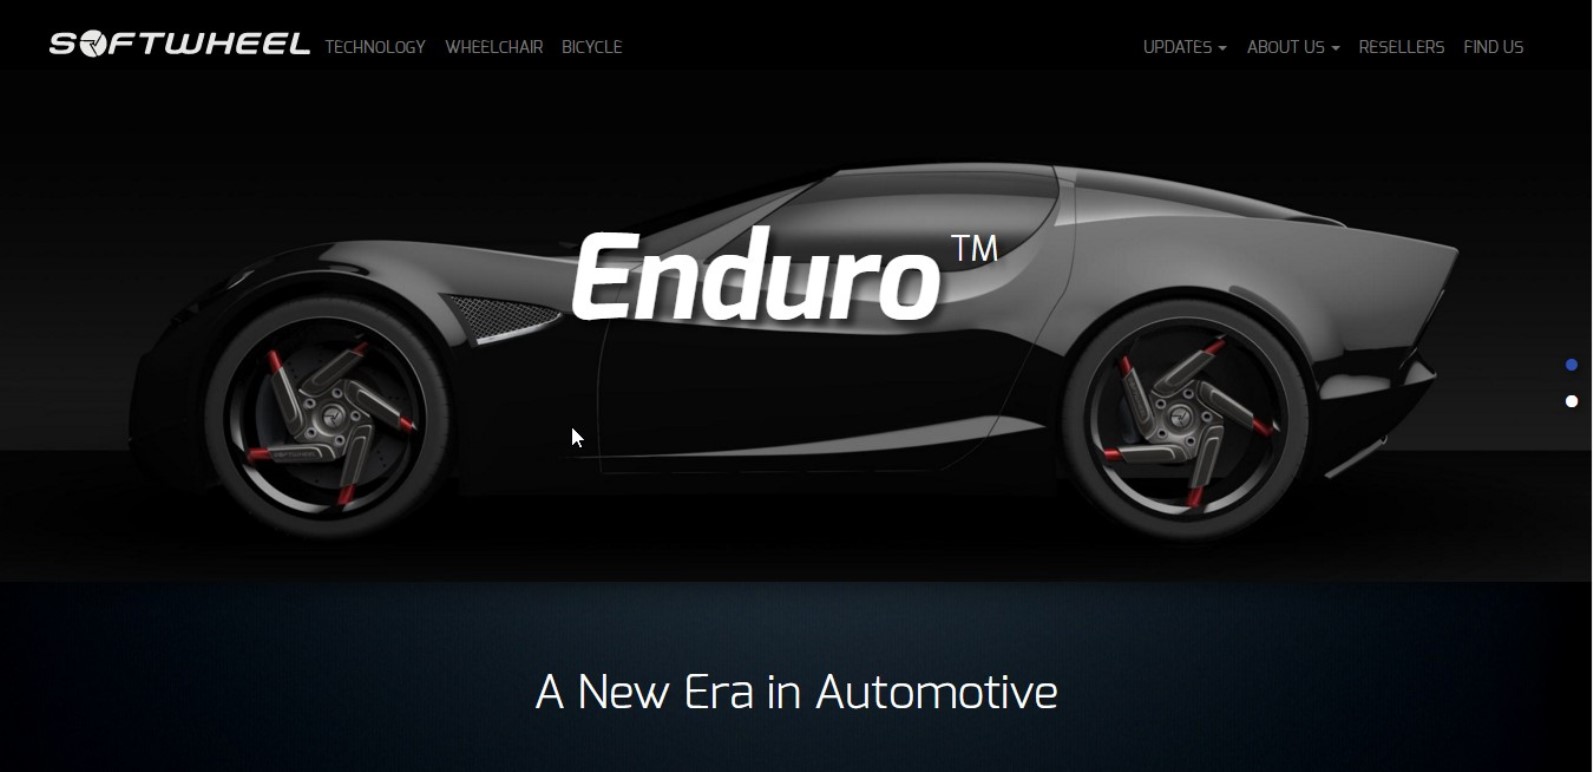 SoftWheelâ€™s Enduro could change the tire industry dramatically. Photo: screenshot